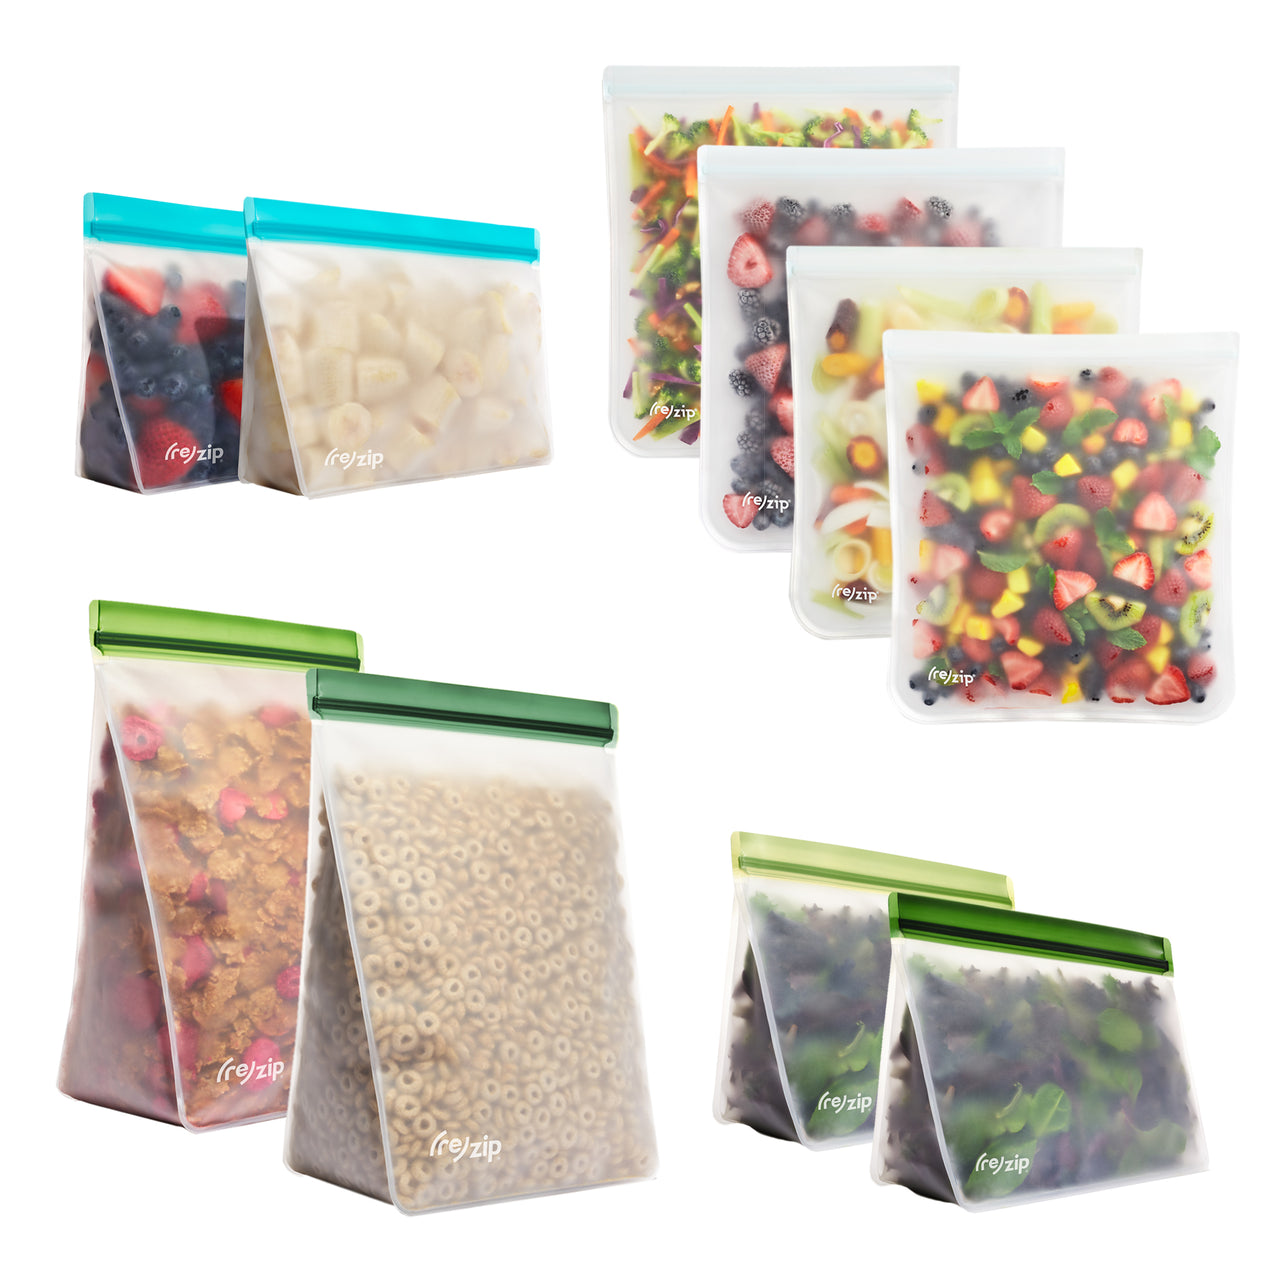 reusable leakproof space saving airtight dry goods, pantry, freezer and refrigerator food storage bags